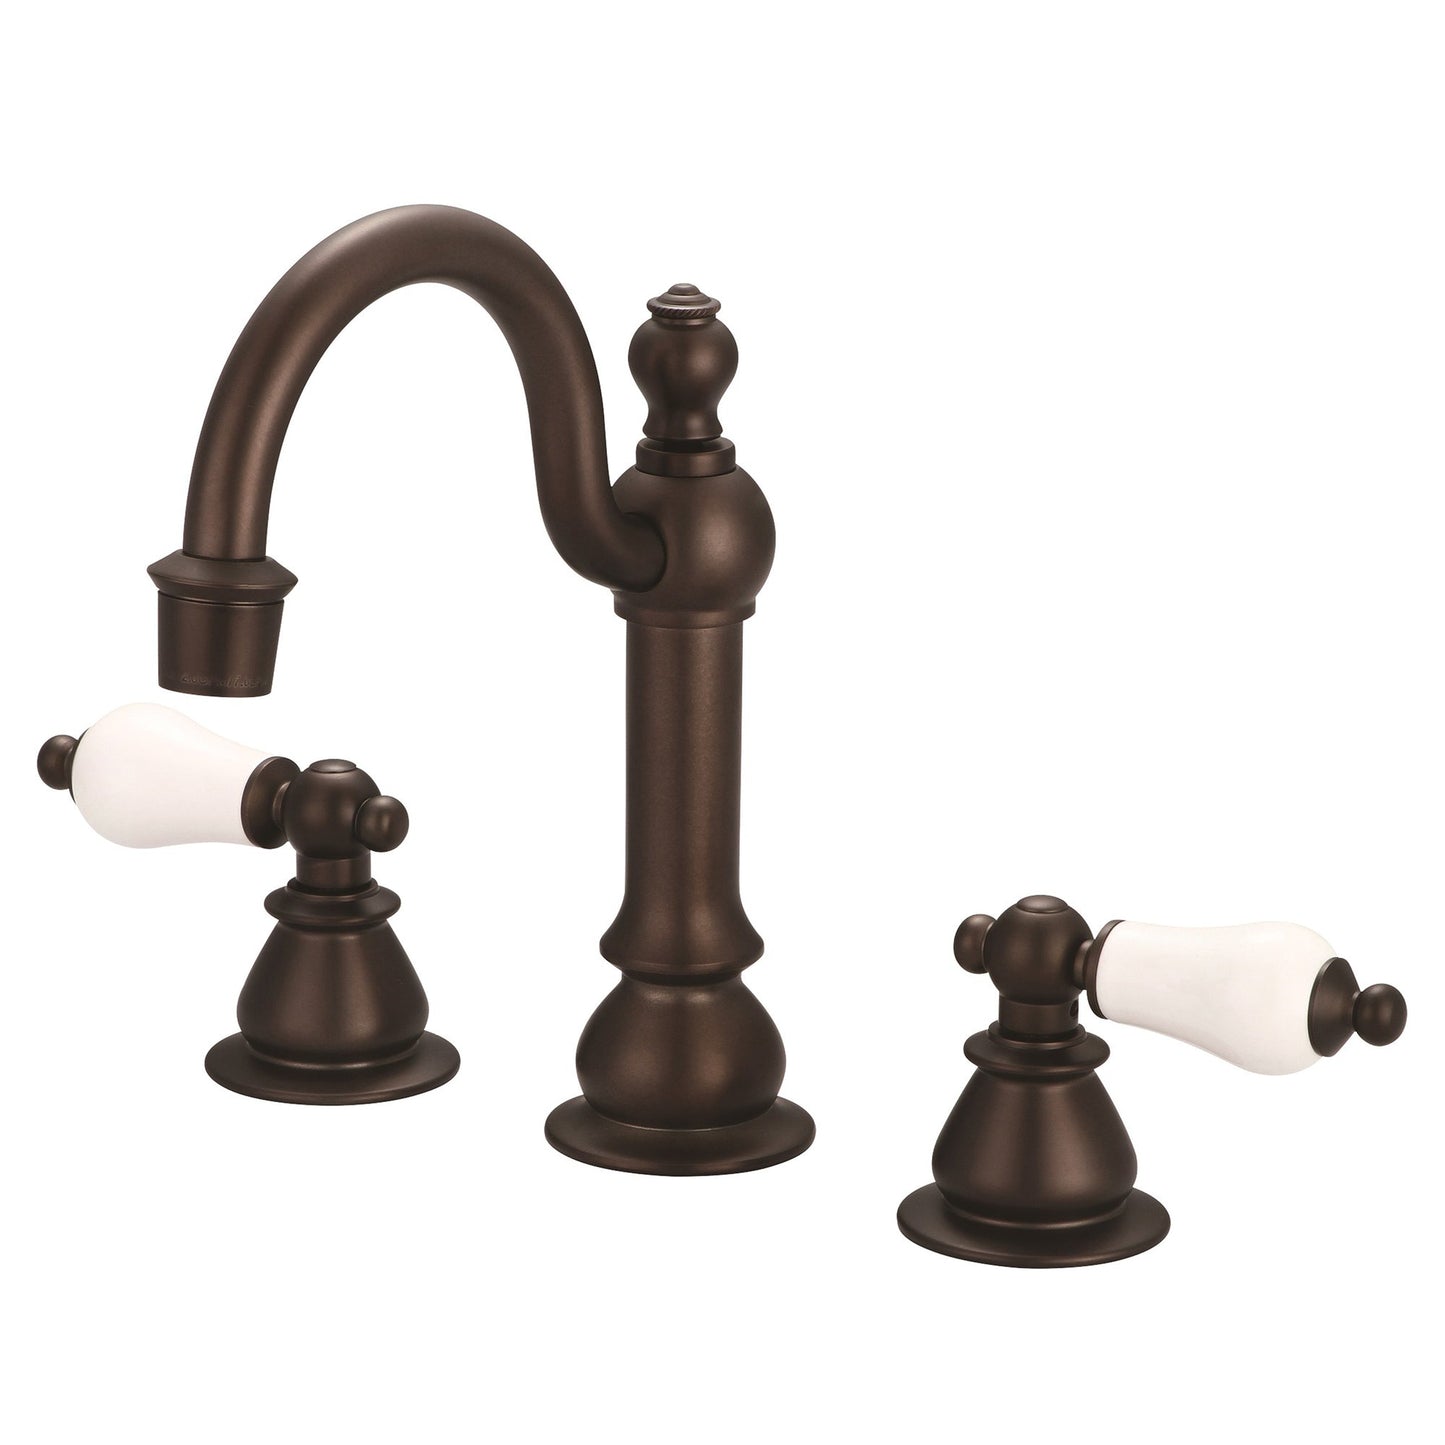 Water Creation American 20th Century Classic Widespread Lavatory F2-0012 8" Brown Solid Brass Faucet With Pop-Up Drain And Porcelain Lever Handles